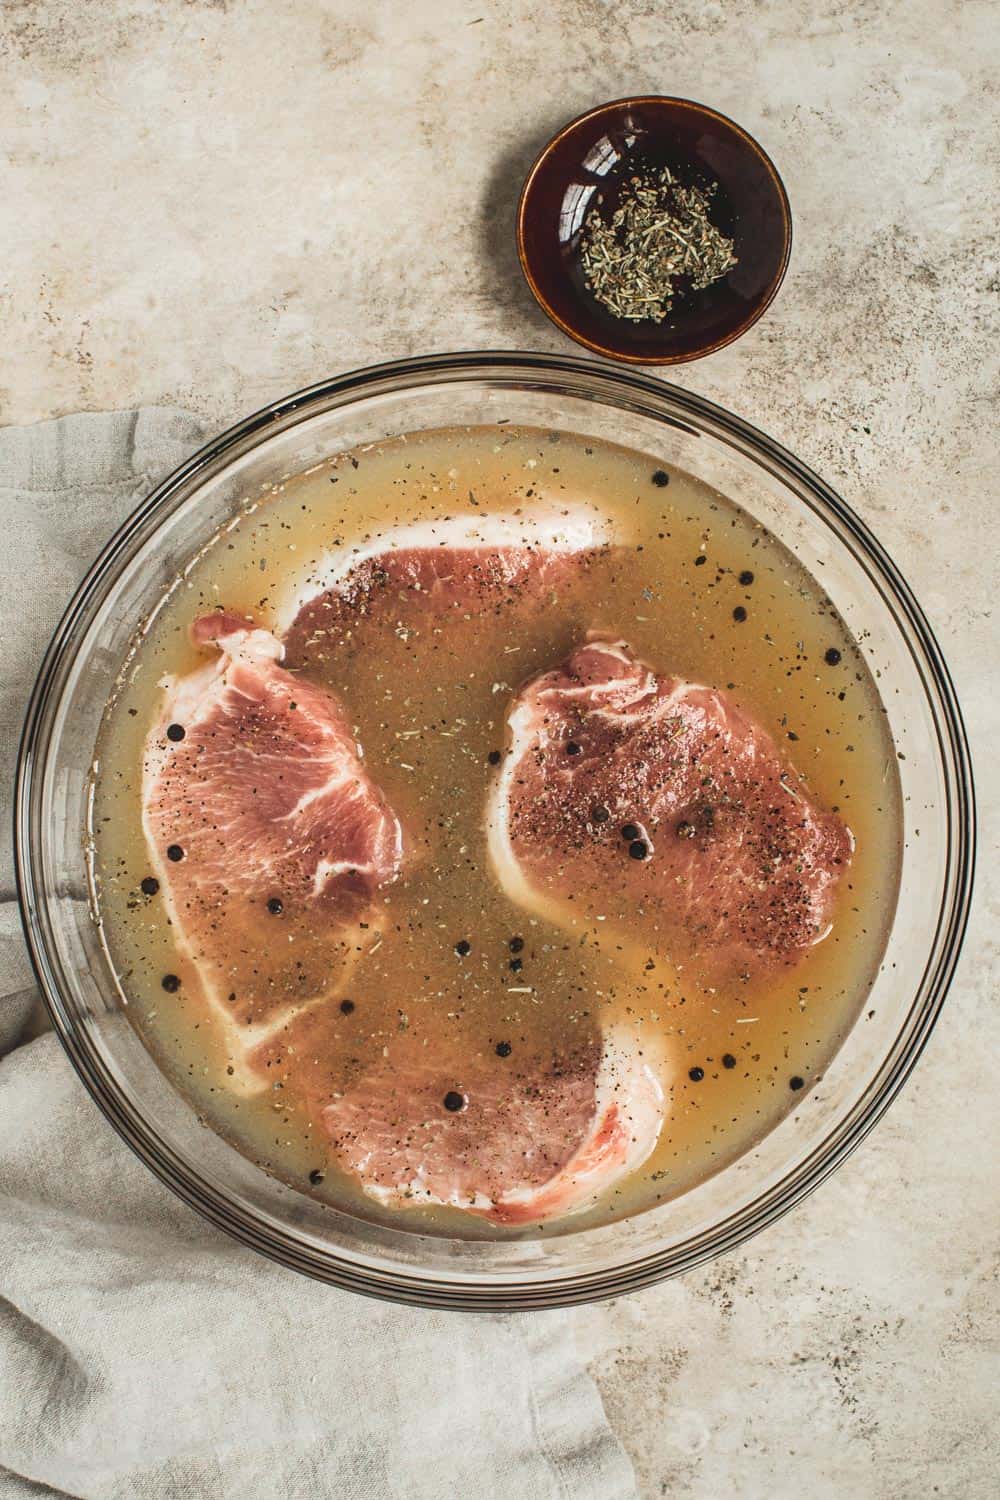 Pork chops in an apple cider brine in a glass mixing bowl.